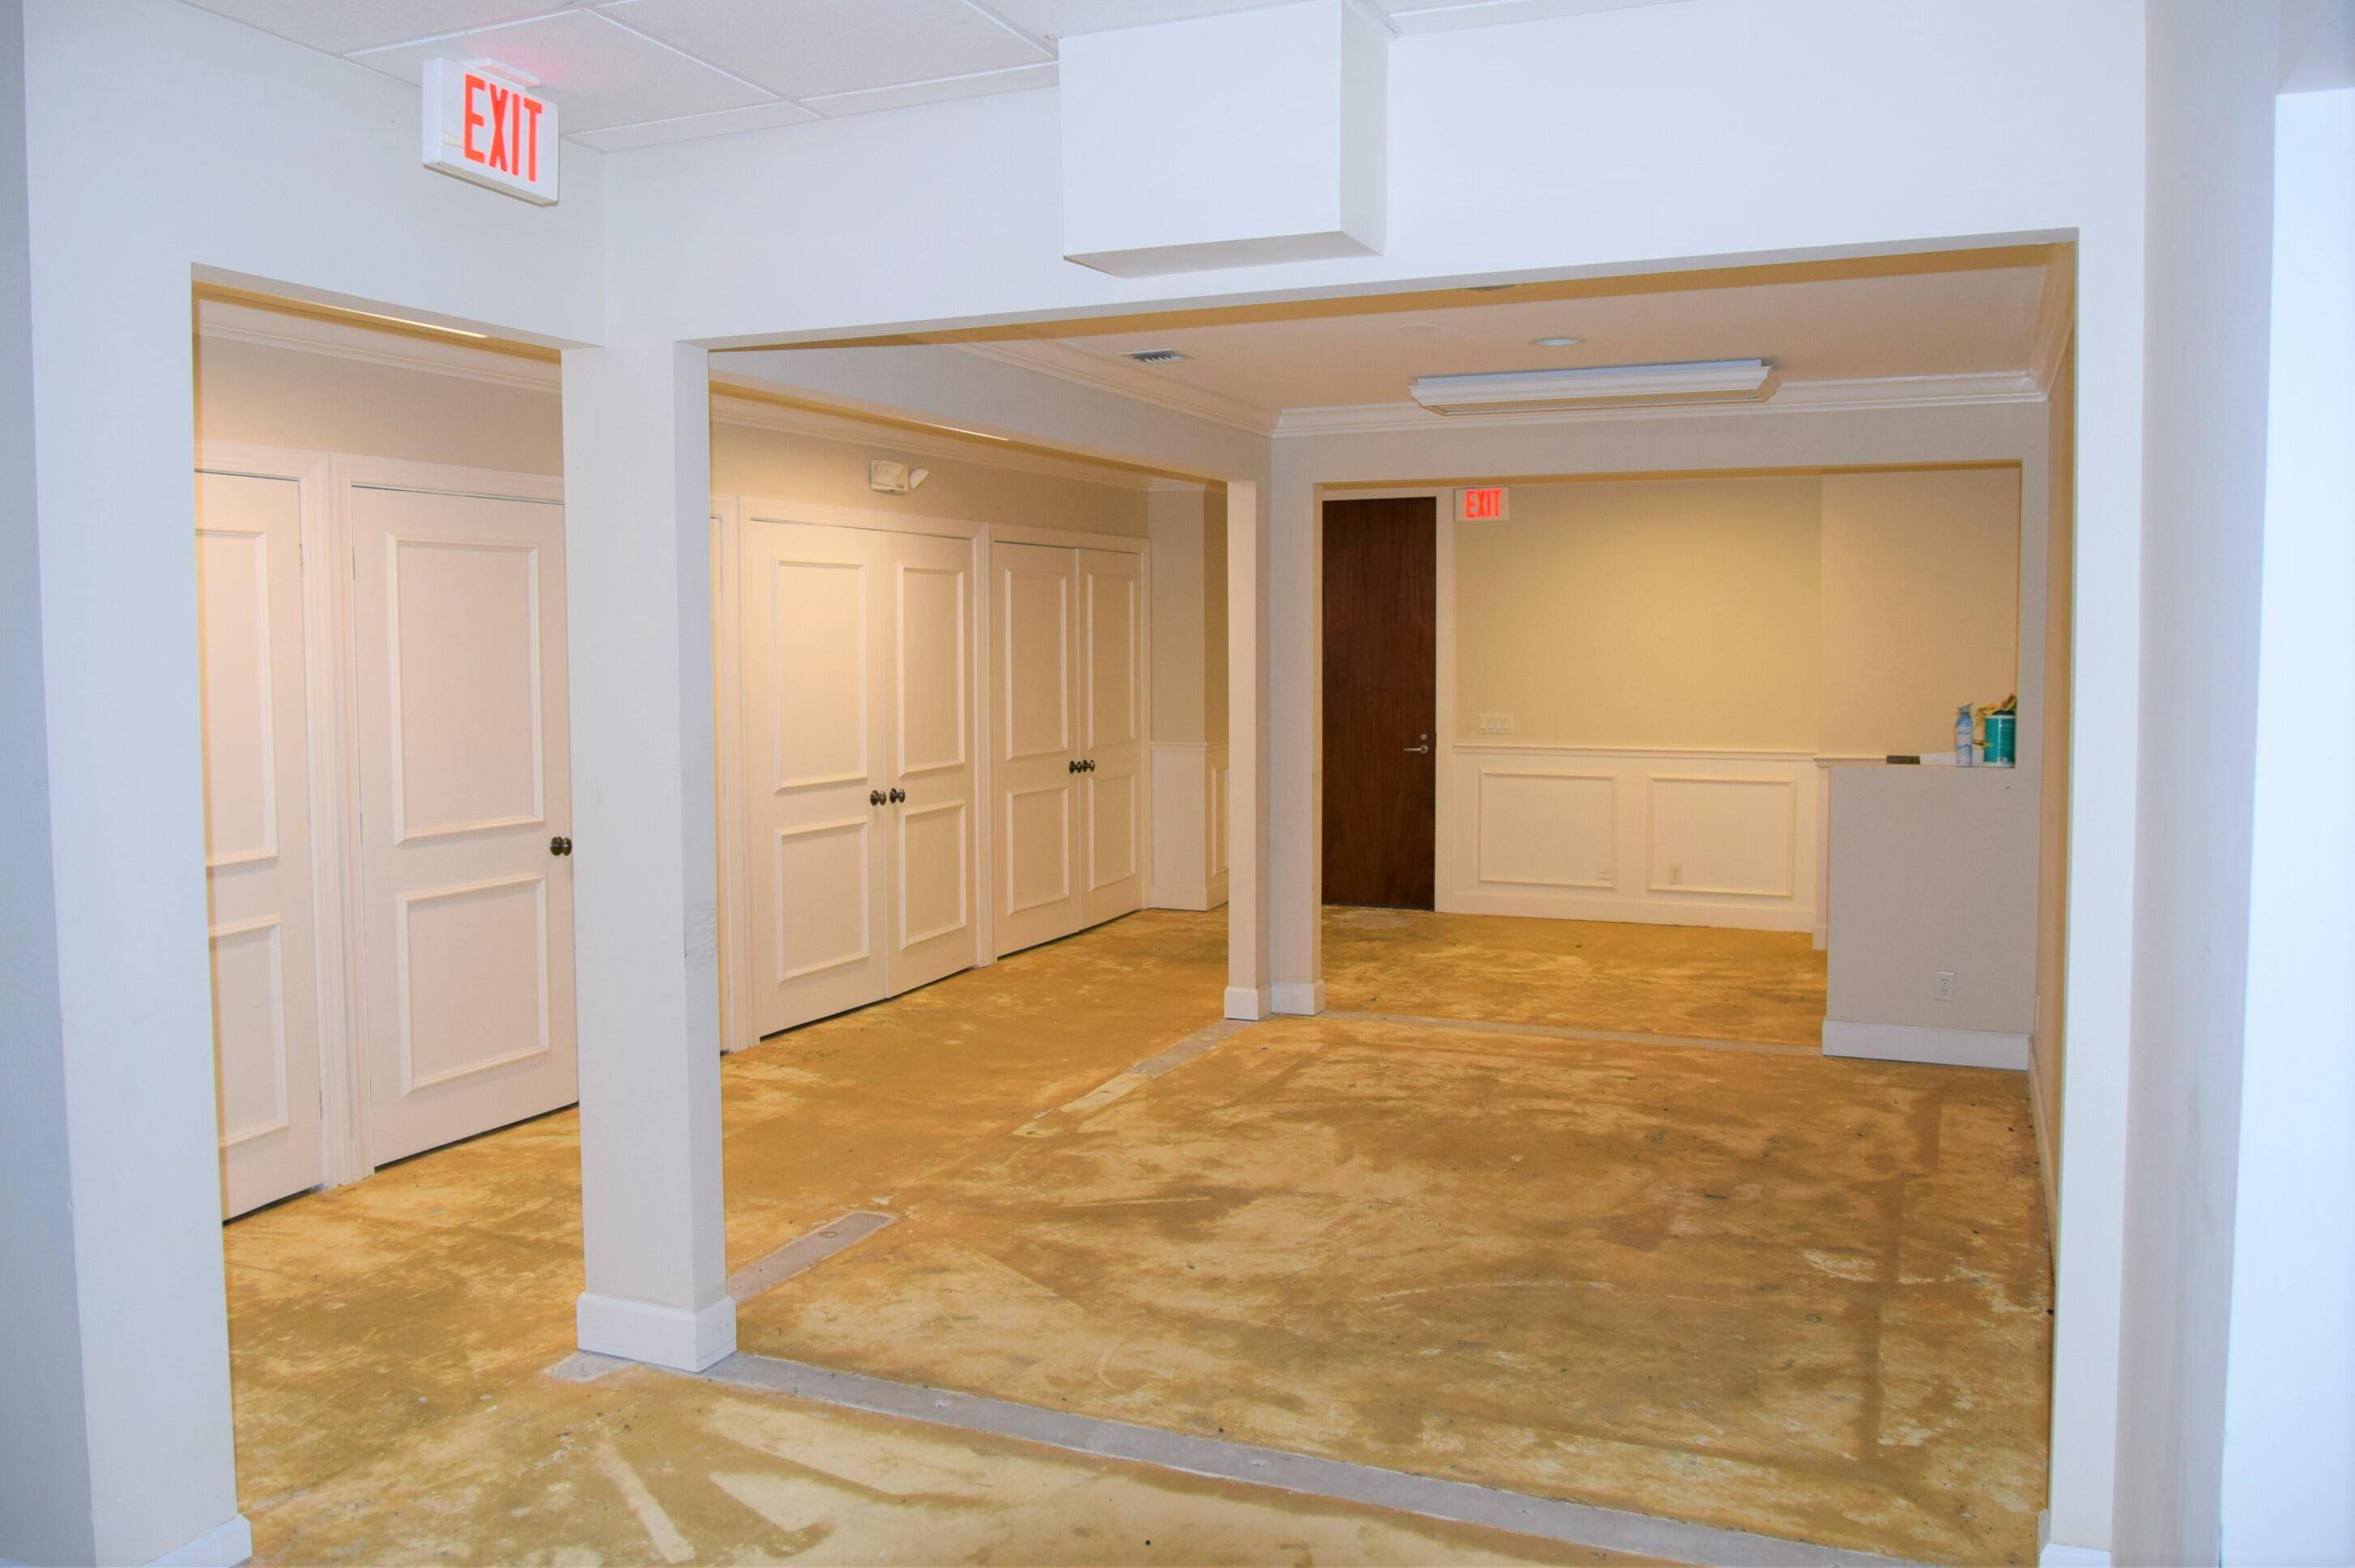 Suite 201 is 1, 210 SF of vacant office space.